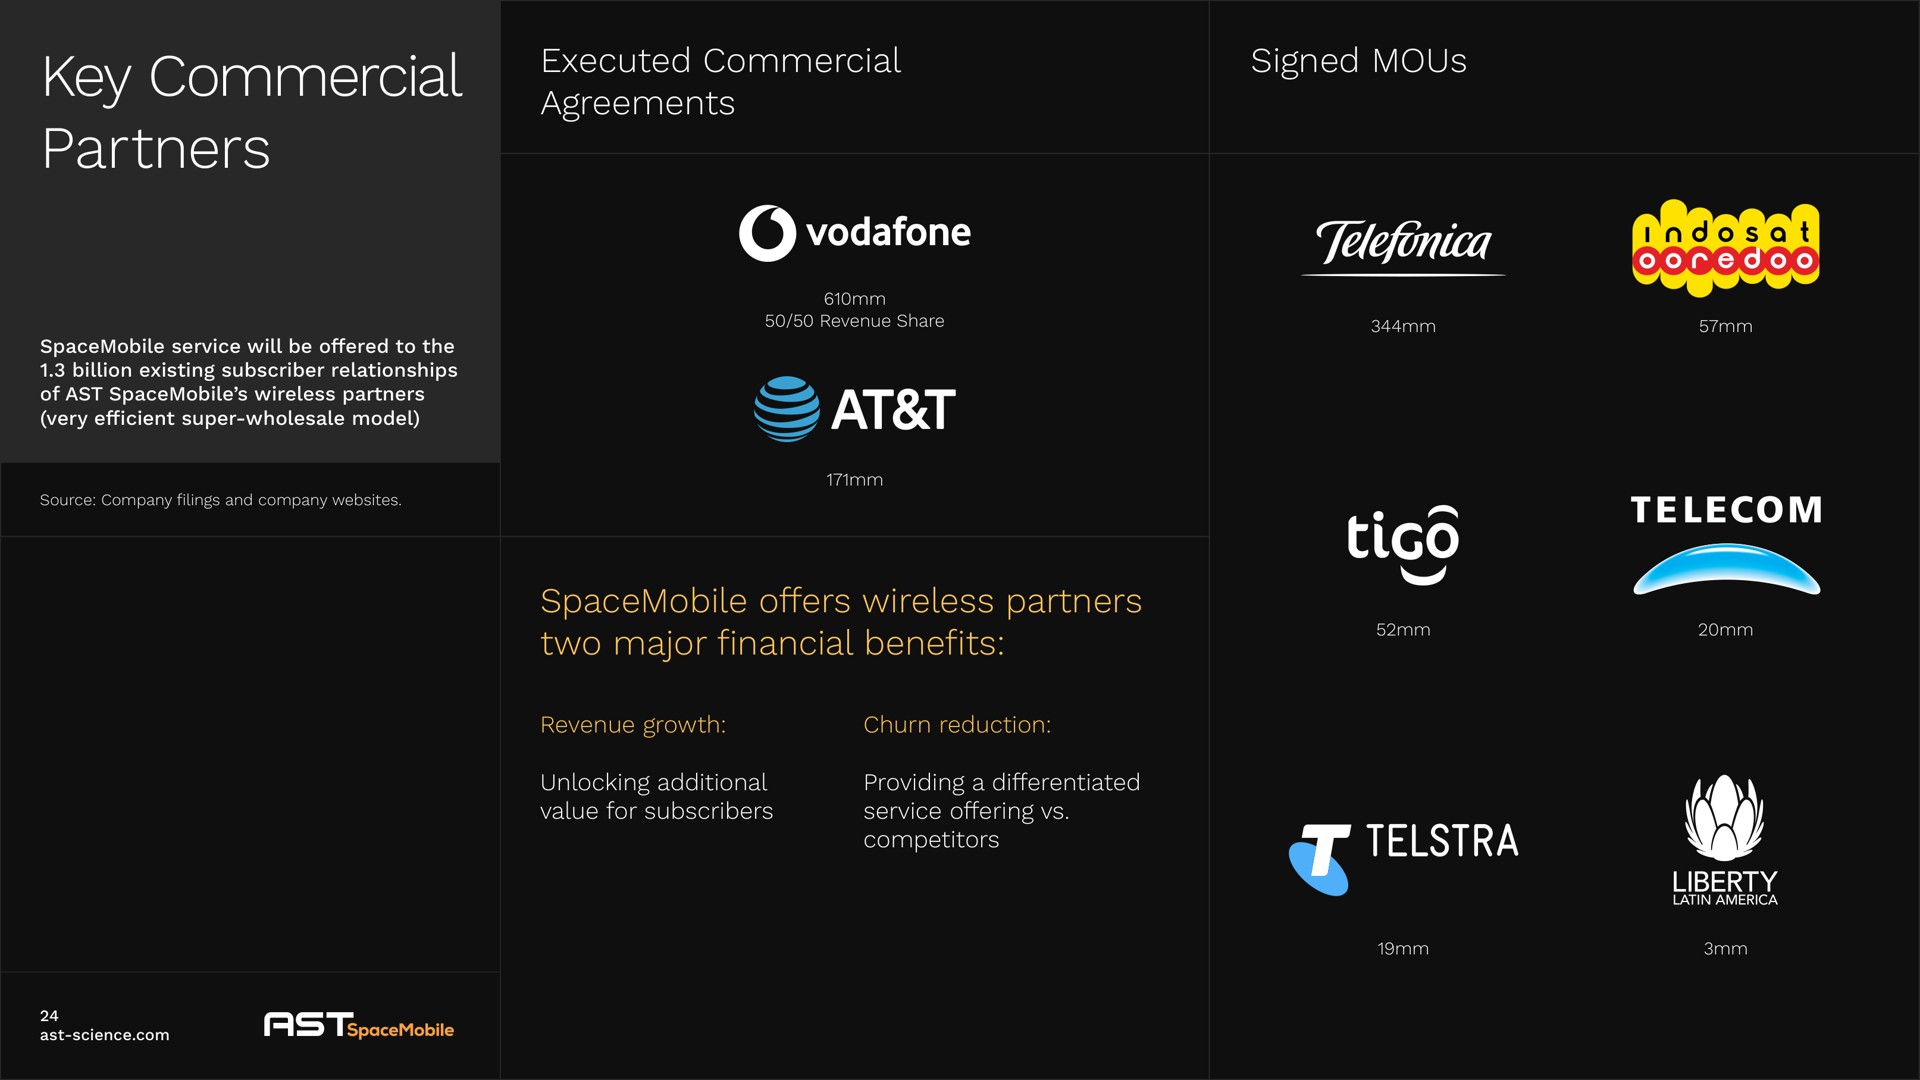 key commercial partners executed commercial agreements signed offers wireless partners two major financial benefits a at i as sey | AST SpaceMobile